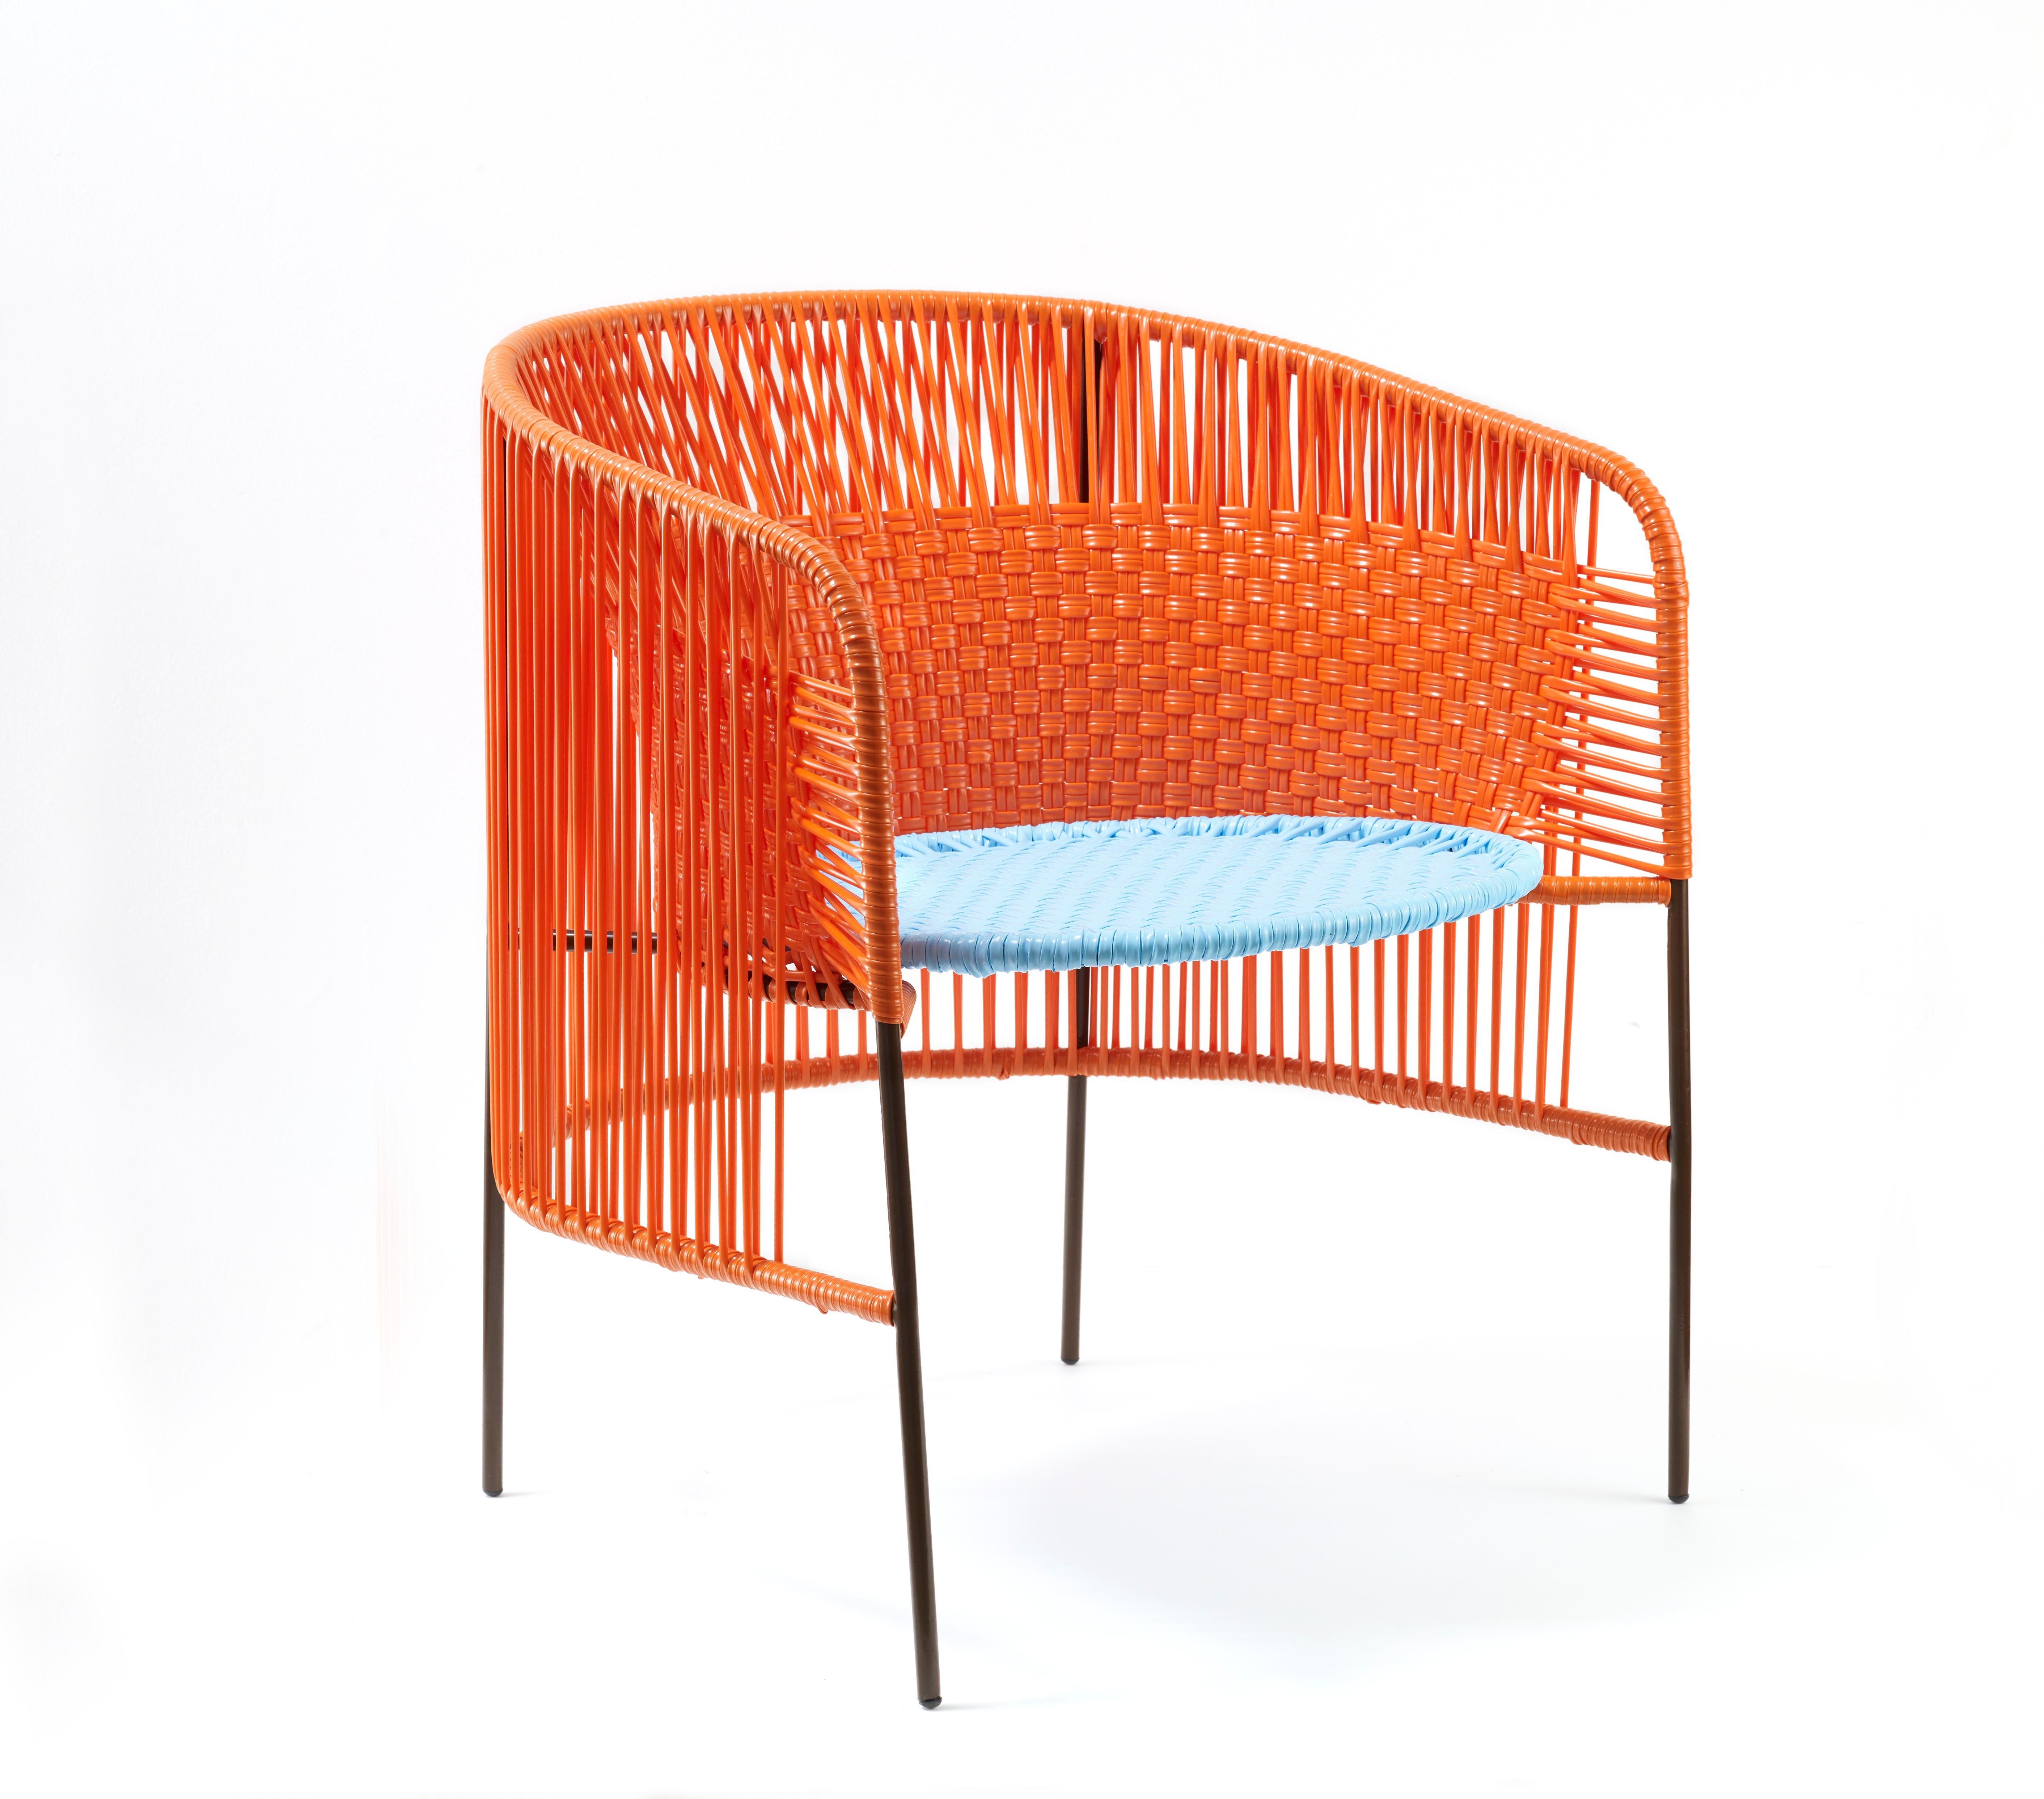 Set of 4 Orange Mint caribe lounge chair by Sebastian Herkner
Materials: Galvanized and powder-coated tubular steel. PVC strings are made from recycled plastic.
Technique: Made from recycled plastic and weaved by local craftspeople in Colombia.